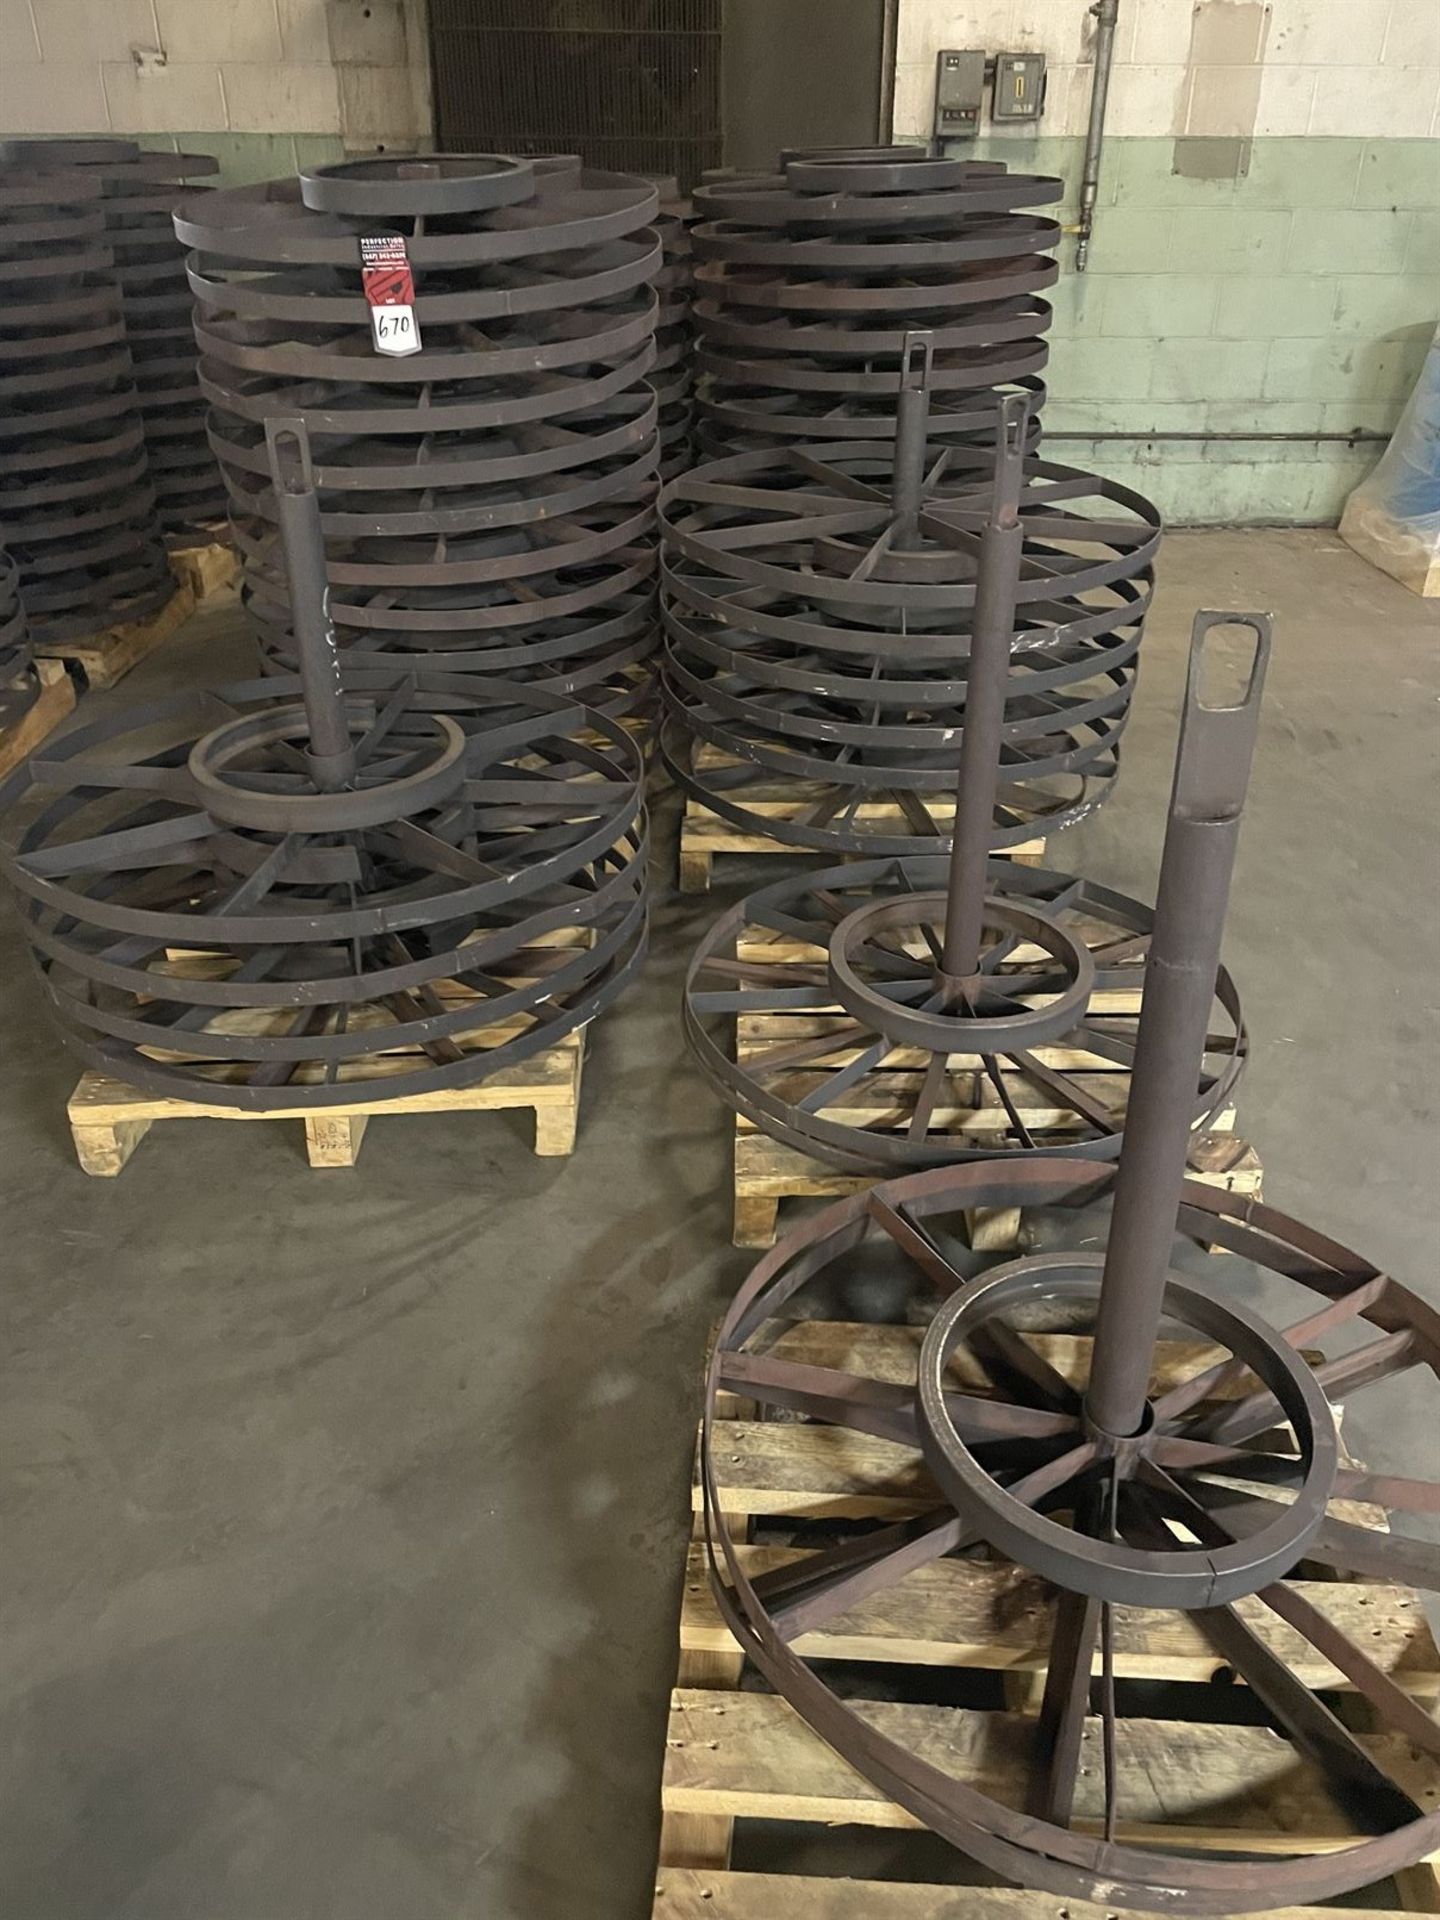 (9) Pallets of saw blade spools and 1 Pallets of unrefined saw blades